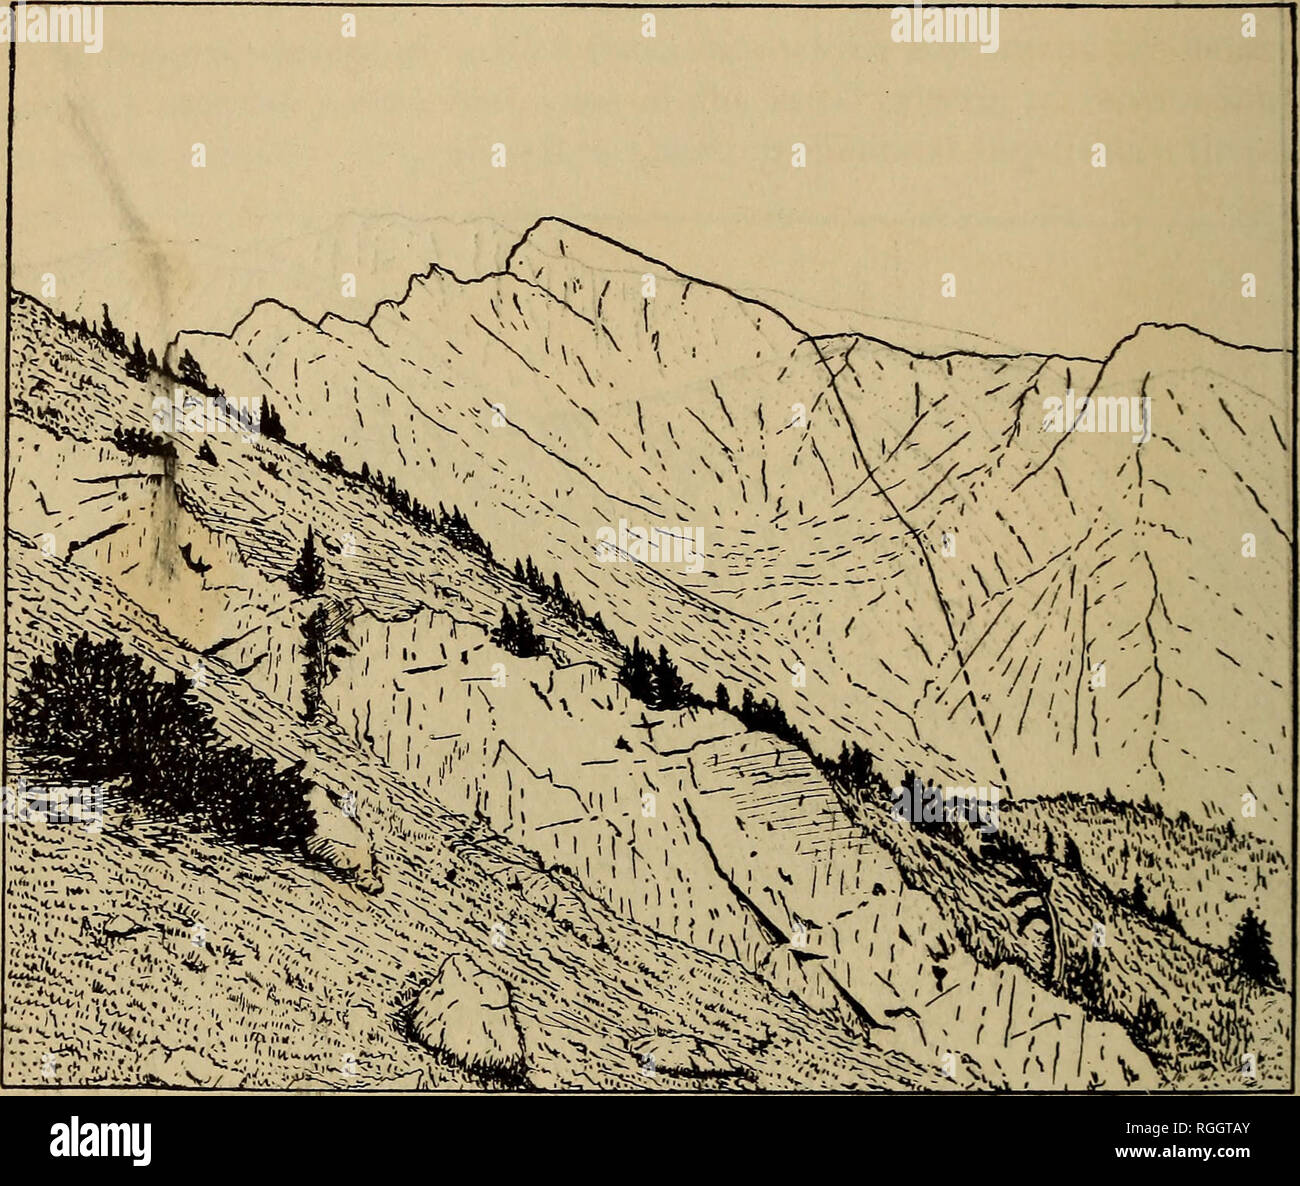 . Bulletin of the Geological Society of America. Geology. 368 R. A. DALY THE OKANAGAN COMPOSITE BATHOLITH granodiorite (figure 8). Moreover, the granodiorite was not introduced by any system of cross-faults or peripheral faults dislocating the sediment- ary rocks. Owing to the special attitudes of the latter, the strike and dip of the beds would be peculiarly sensitive to such dislocation. The fault- ing actually displayed in the Cretaceous beds is strike faulting and was completed before the granodiorite was intruded (figure 7). The igneous. Figure 11.—Plunging Contact Surface between intrusi Stock Photo